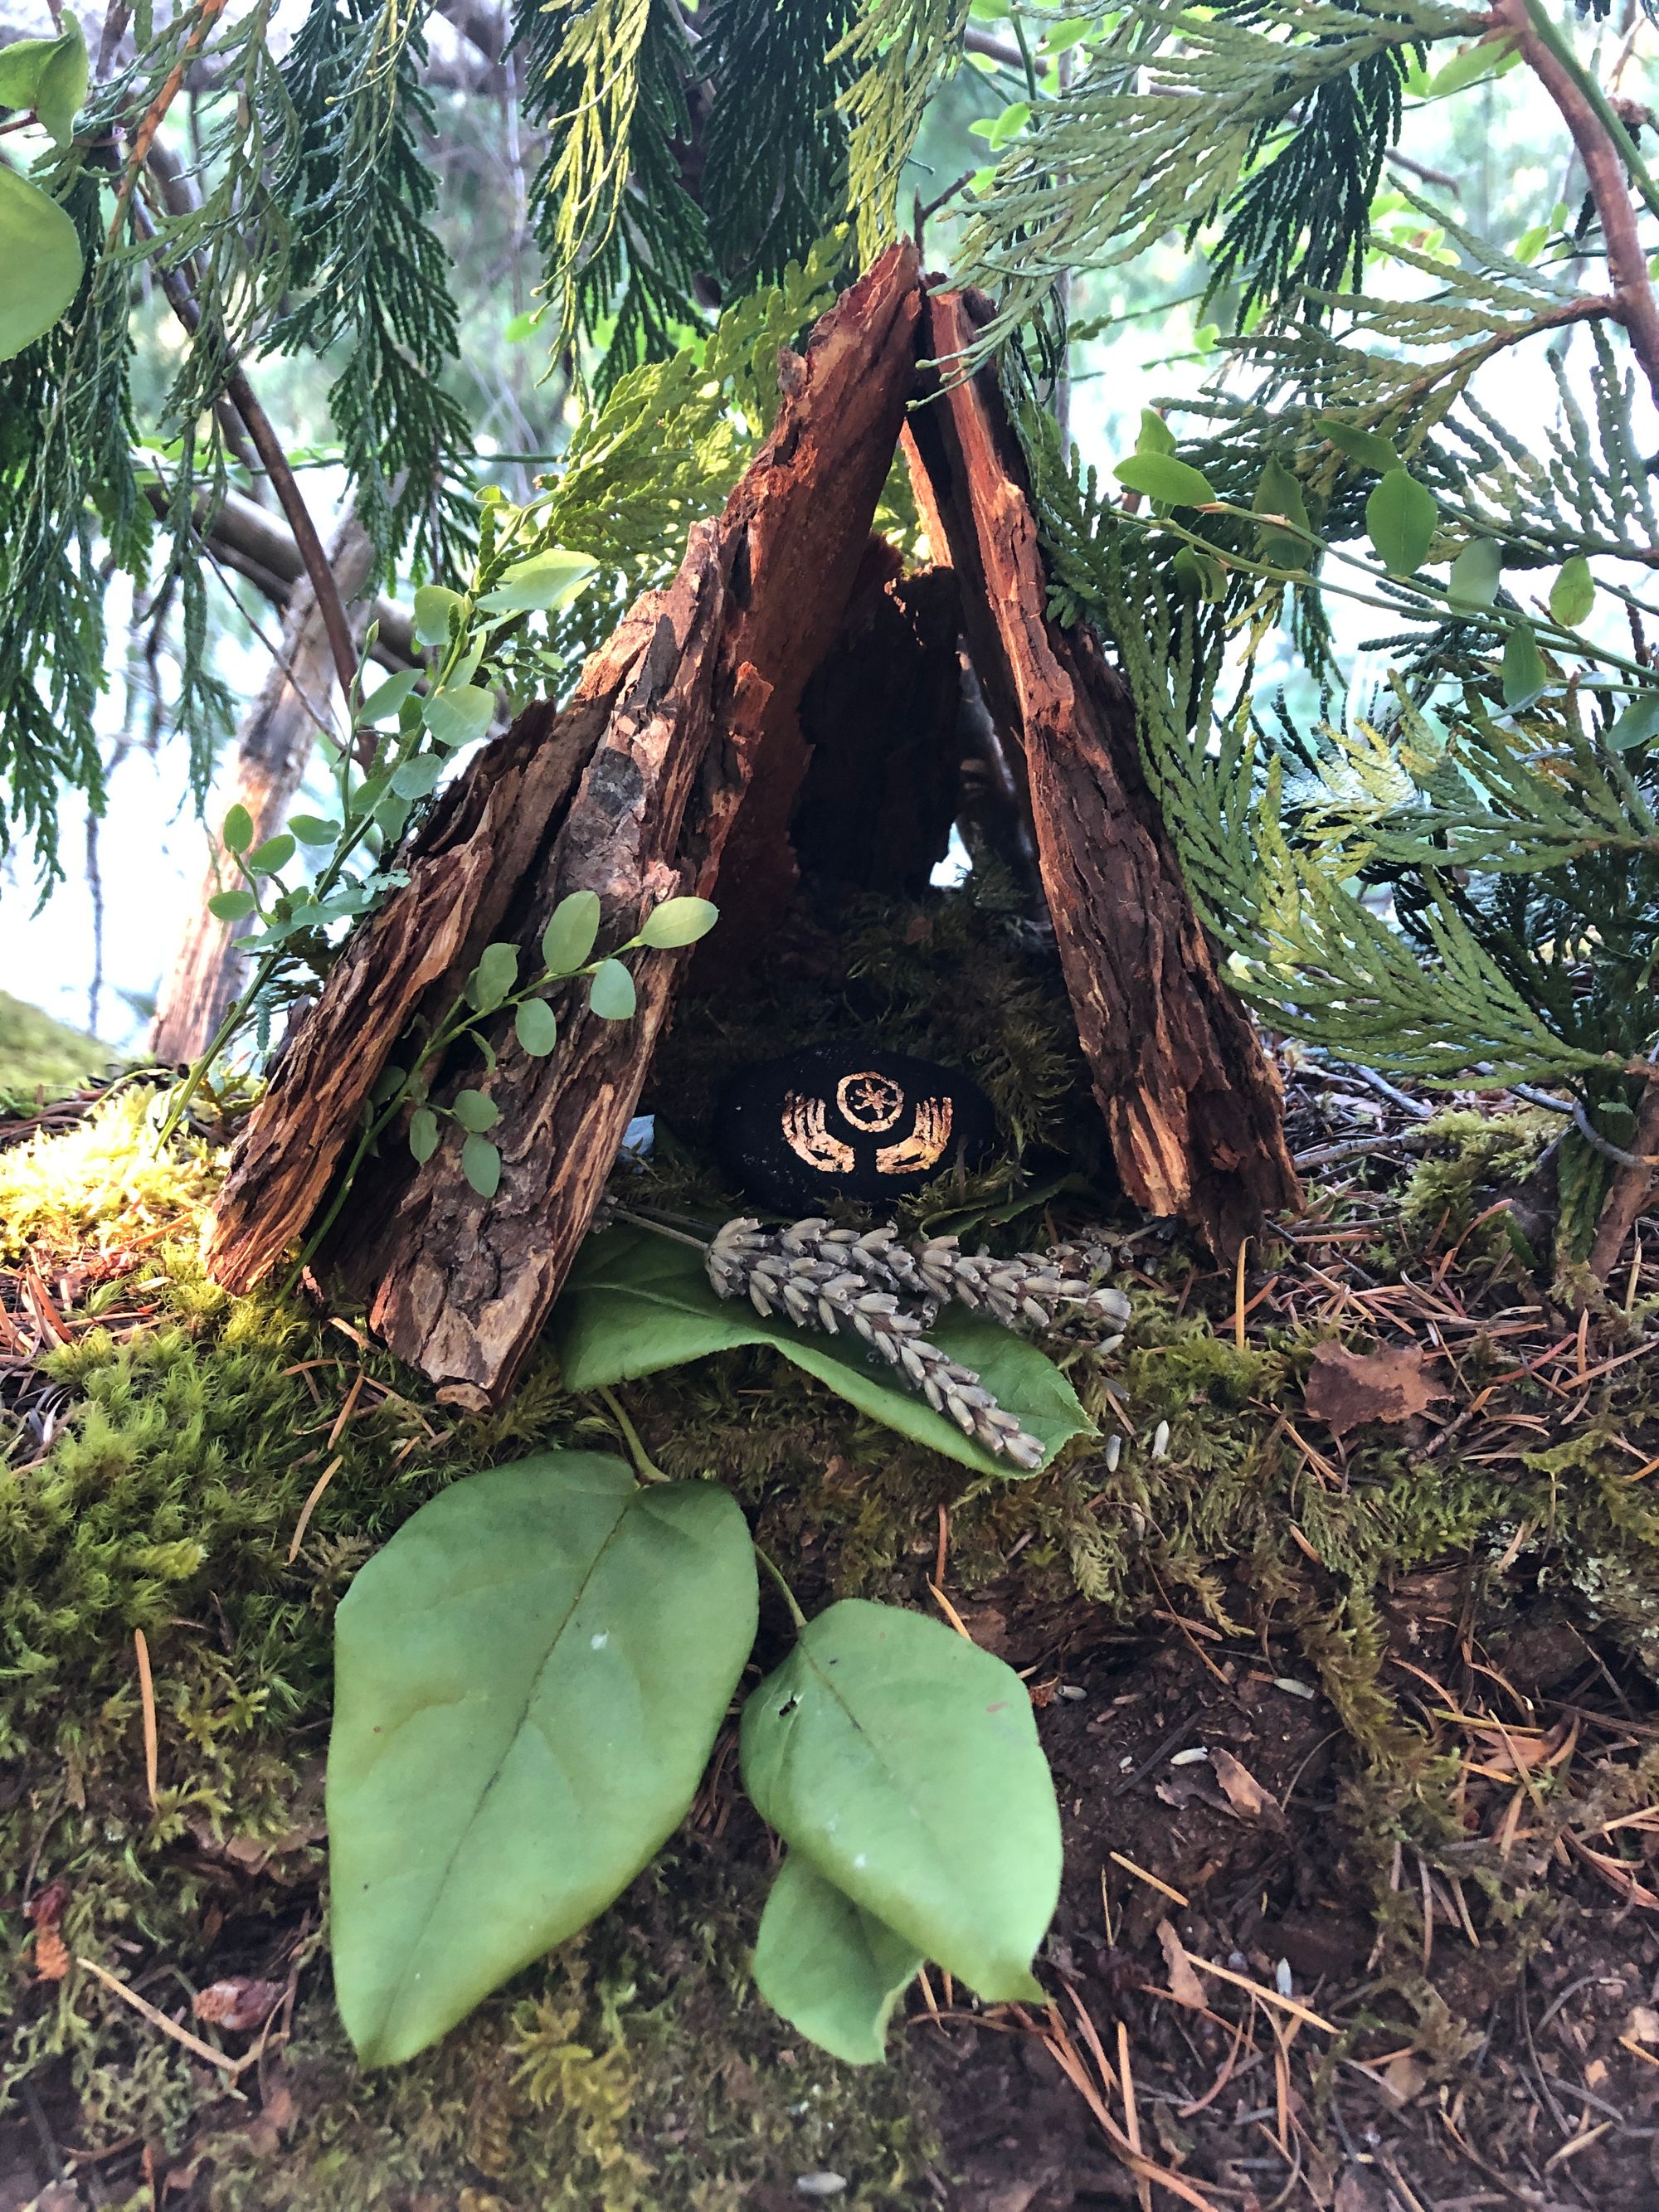 On a mossy log, a small shelter made of leaning lengths of tree bark encloses two sprigs of lavender and a stone on which have been painted, in metallic paint, two stylized hands above which floats a circle with an asterix inside. It looks like a sacred space enfolding a precious secret..